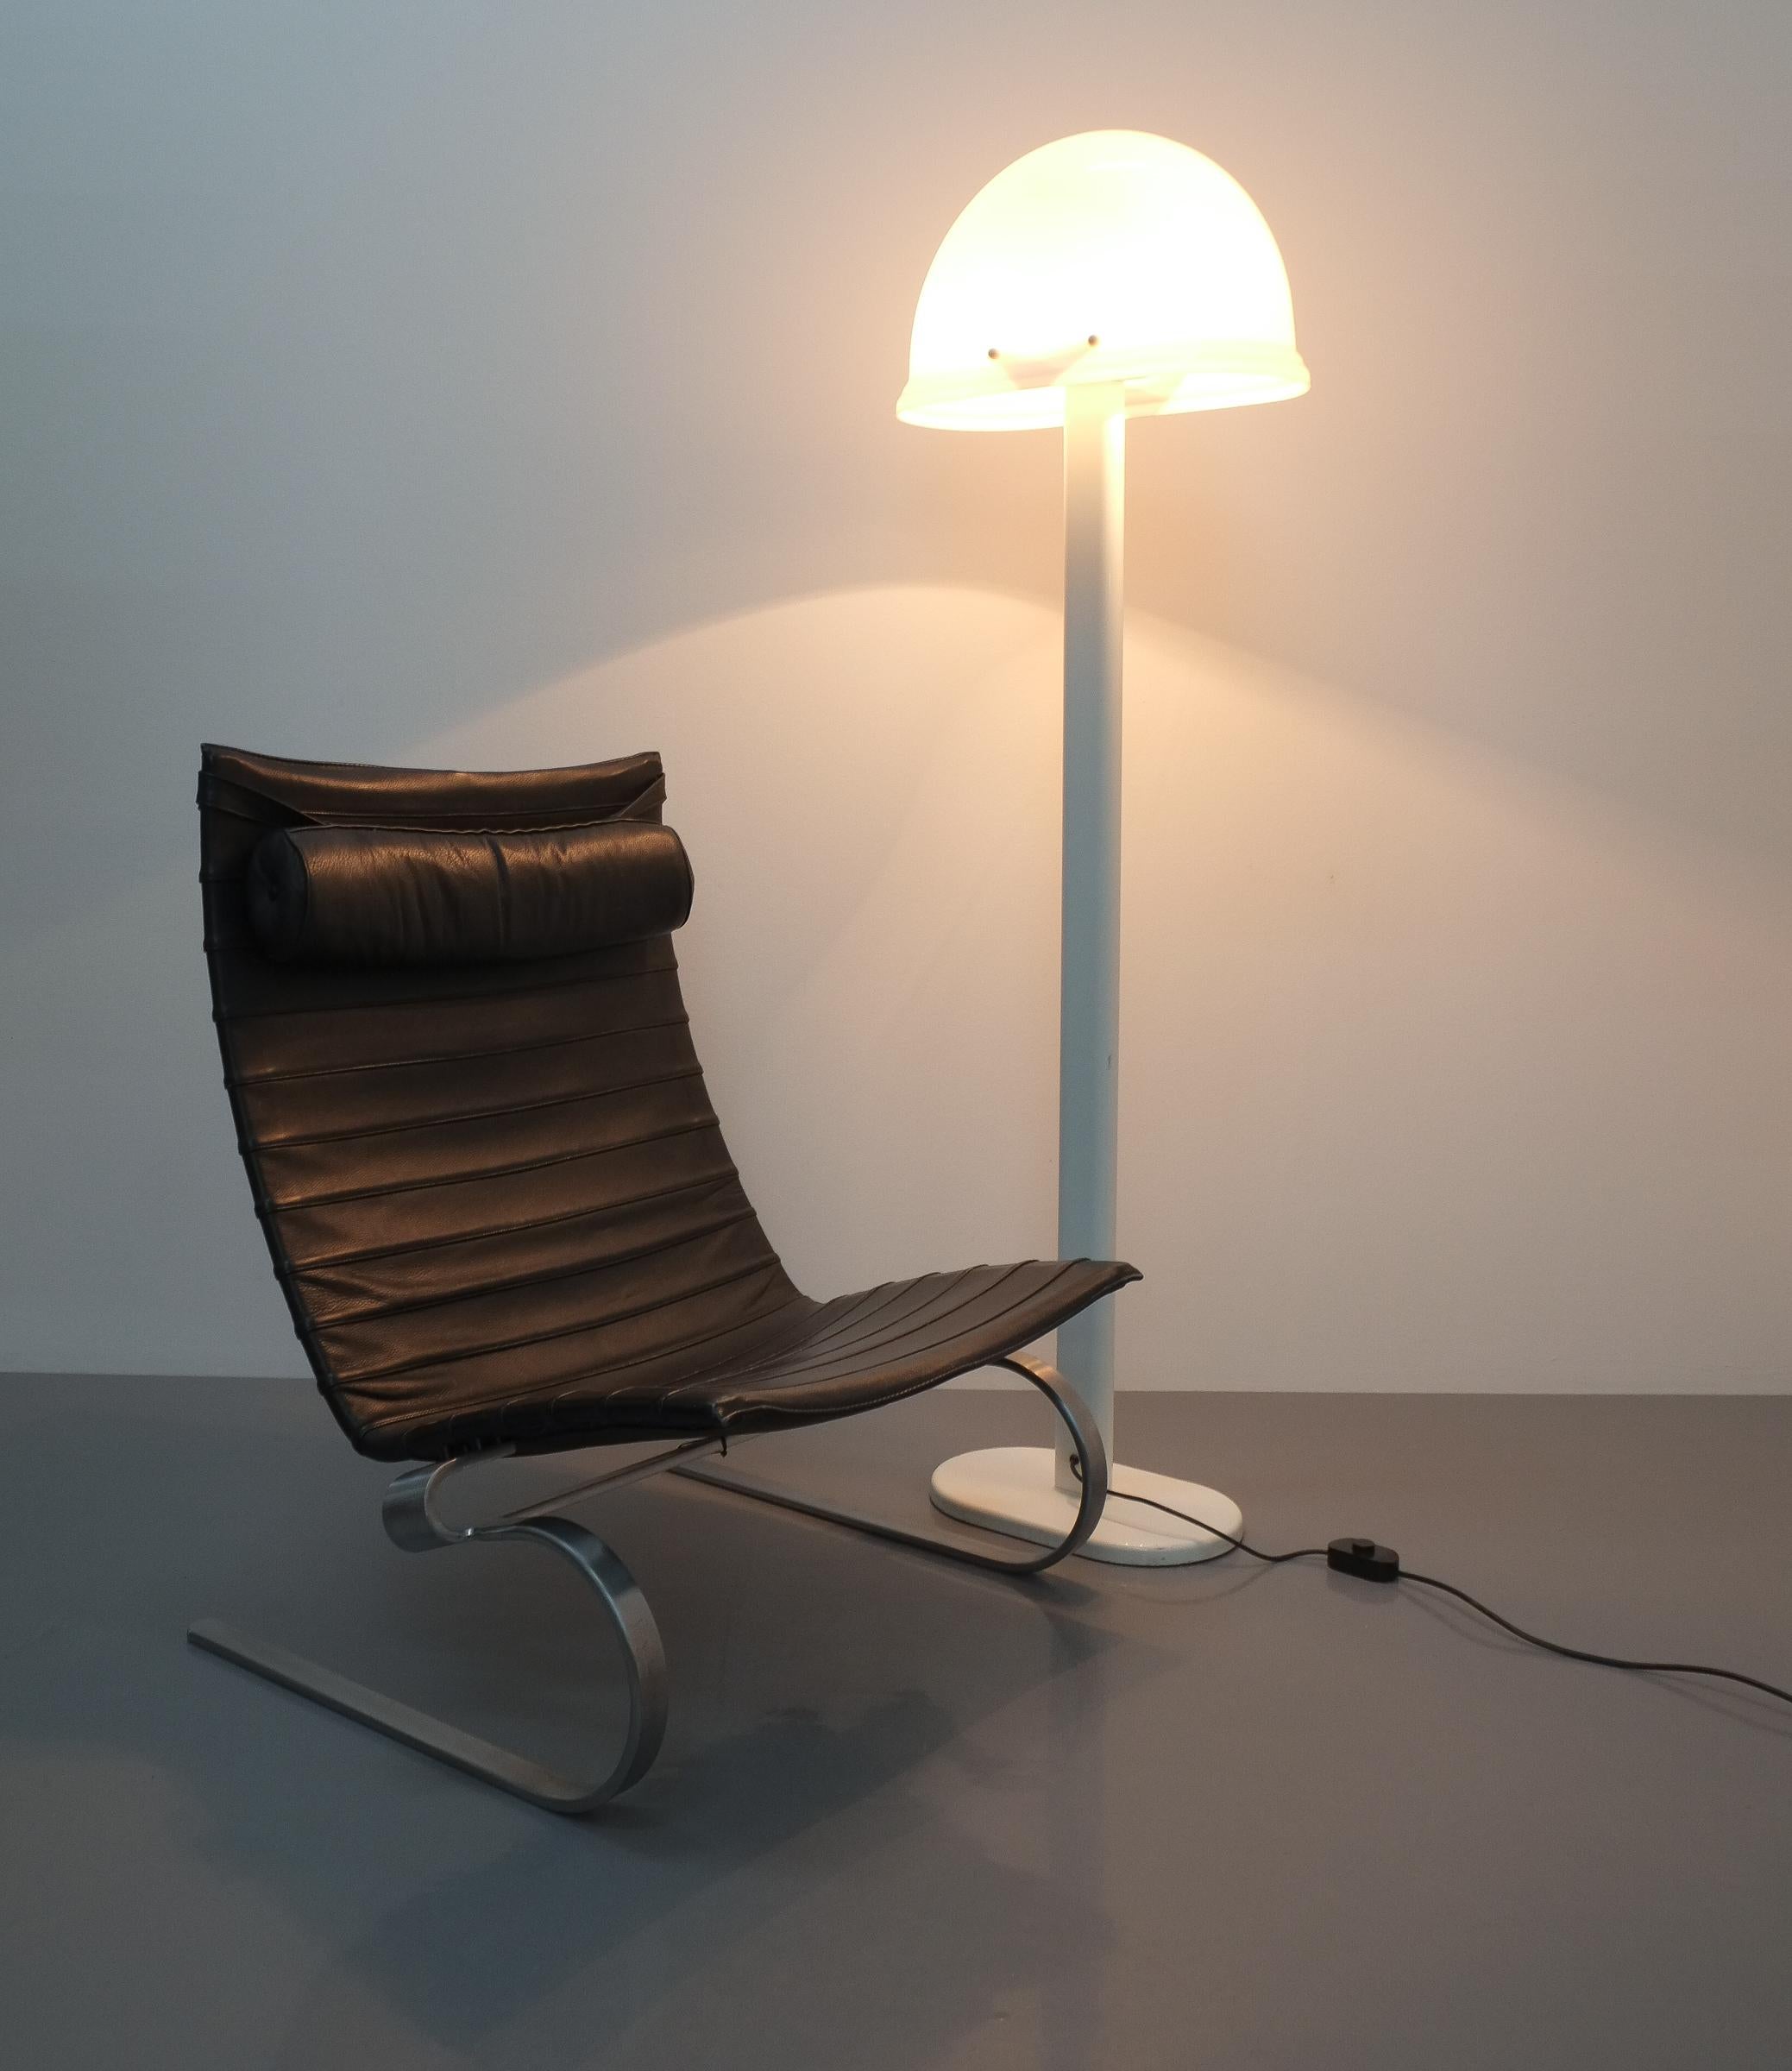 Rodolfo Bonetto white metal Lucite floor lamp Guzzini, Italy, 1970

Rare graphical floor lamp by Rodolfo Bonetto, I Guzzini, Italy, 1970 featuring a helmet shaped Lucite shade on a white metal base. Good condition, cleaned checked and ready to go.